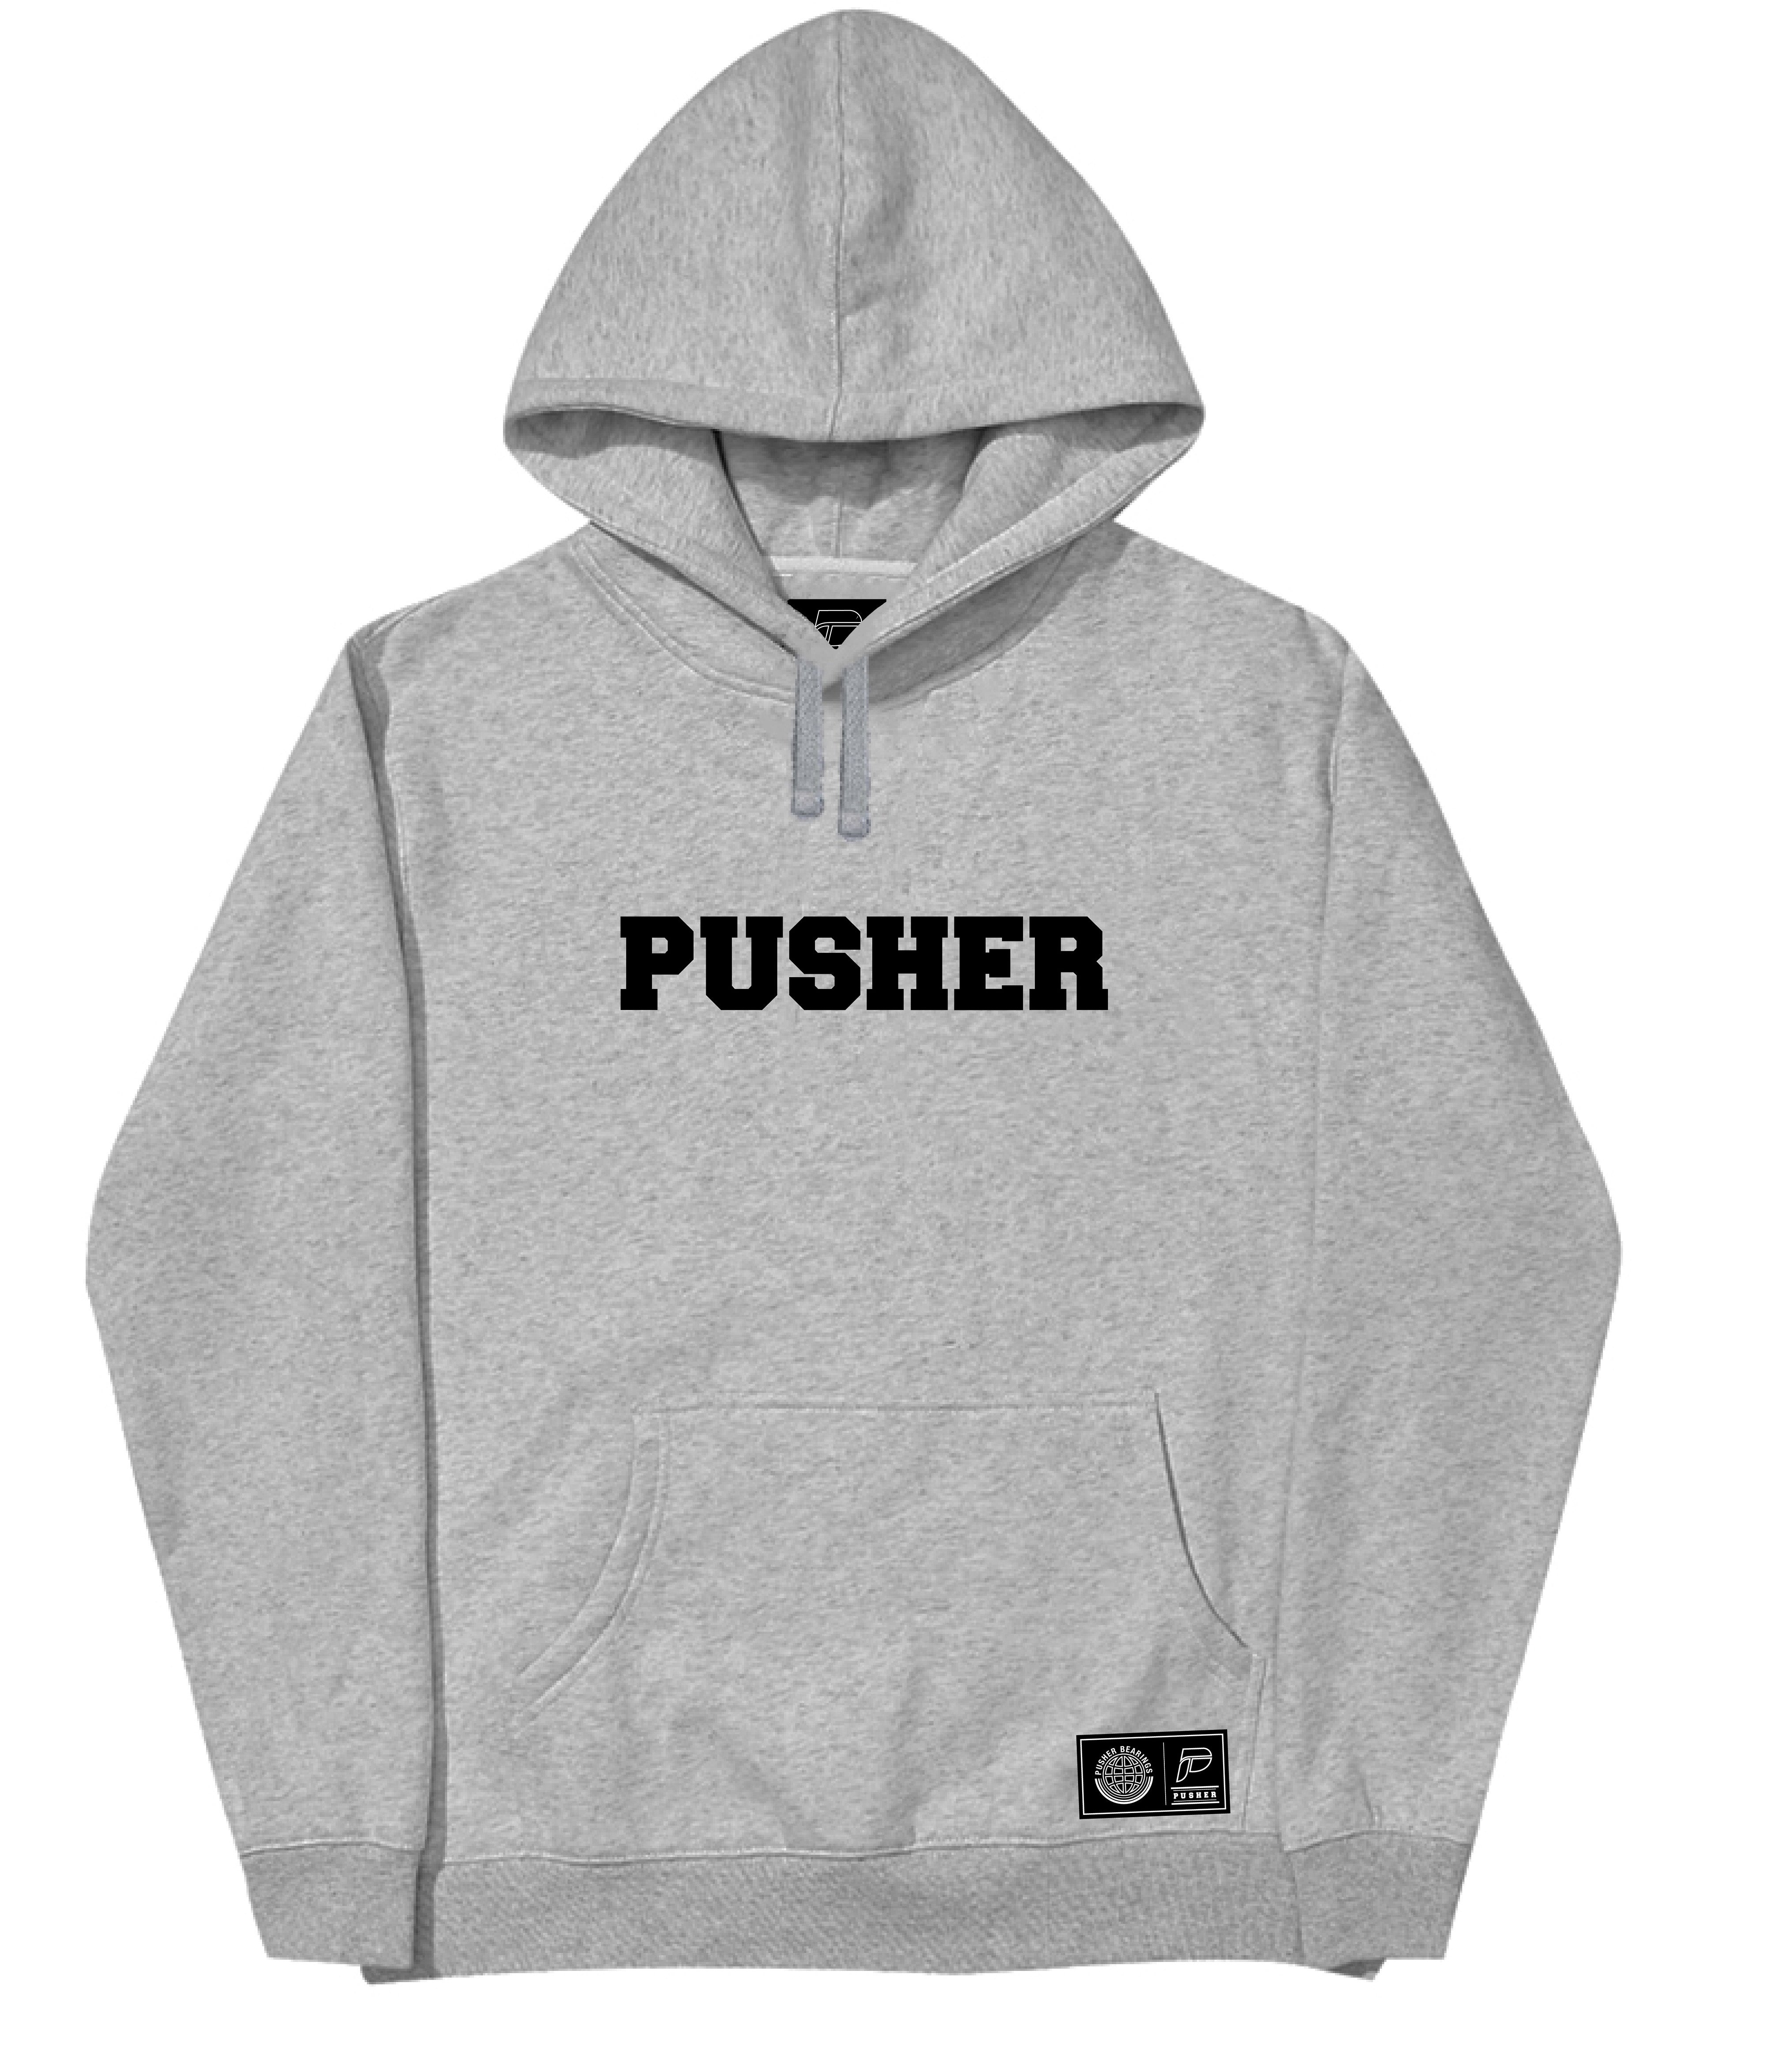 Stay cozy and stylish with our grey Pushher hoodie. Perfect for any occasion. Get yours now!